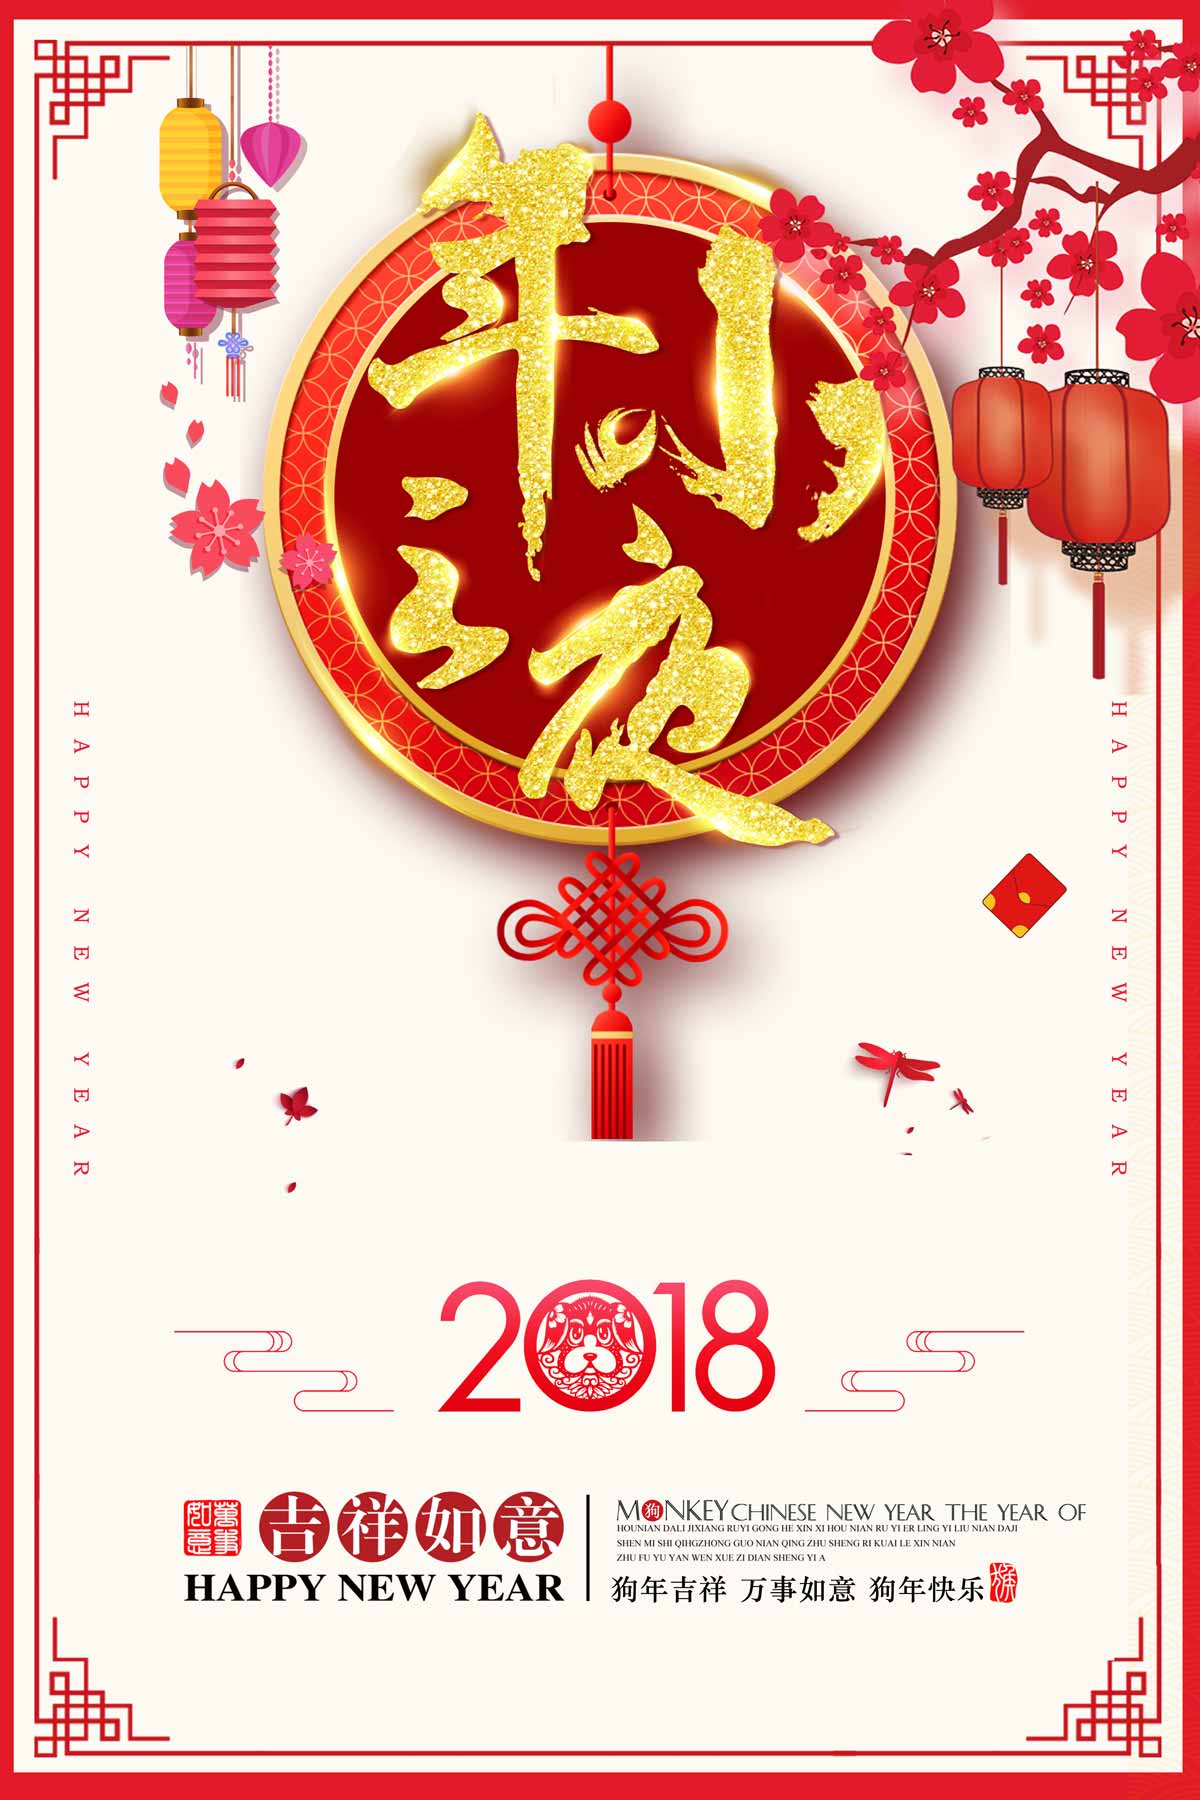 poster-design-for-the-chinese-new-year-s-eve-festival-psd-file-free